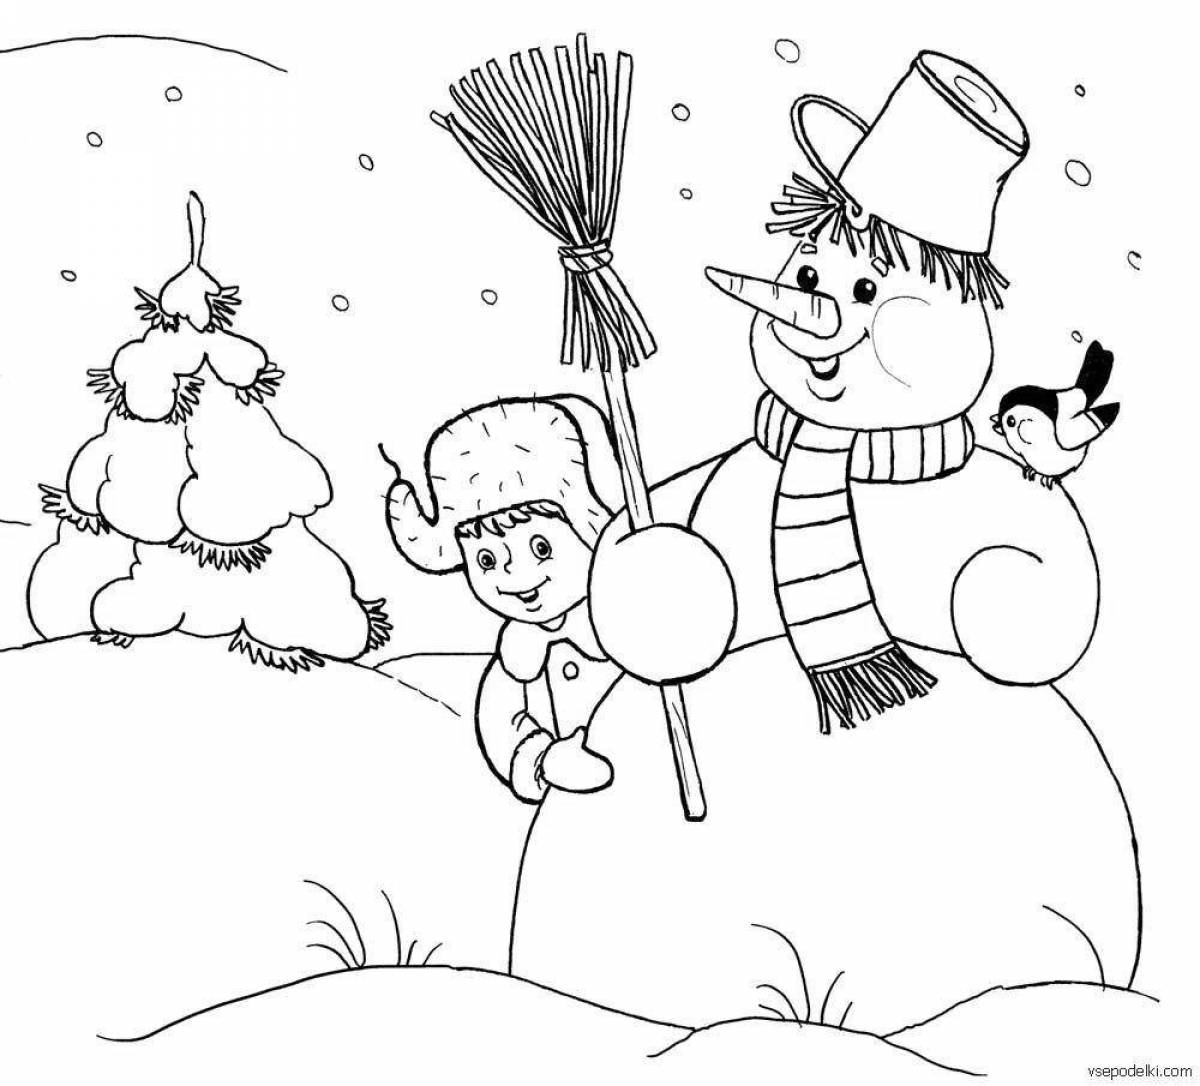 Glowing snowman coloring book for kids 3 4